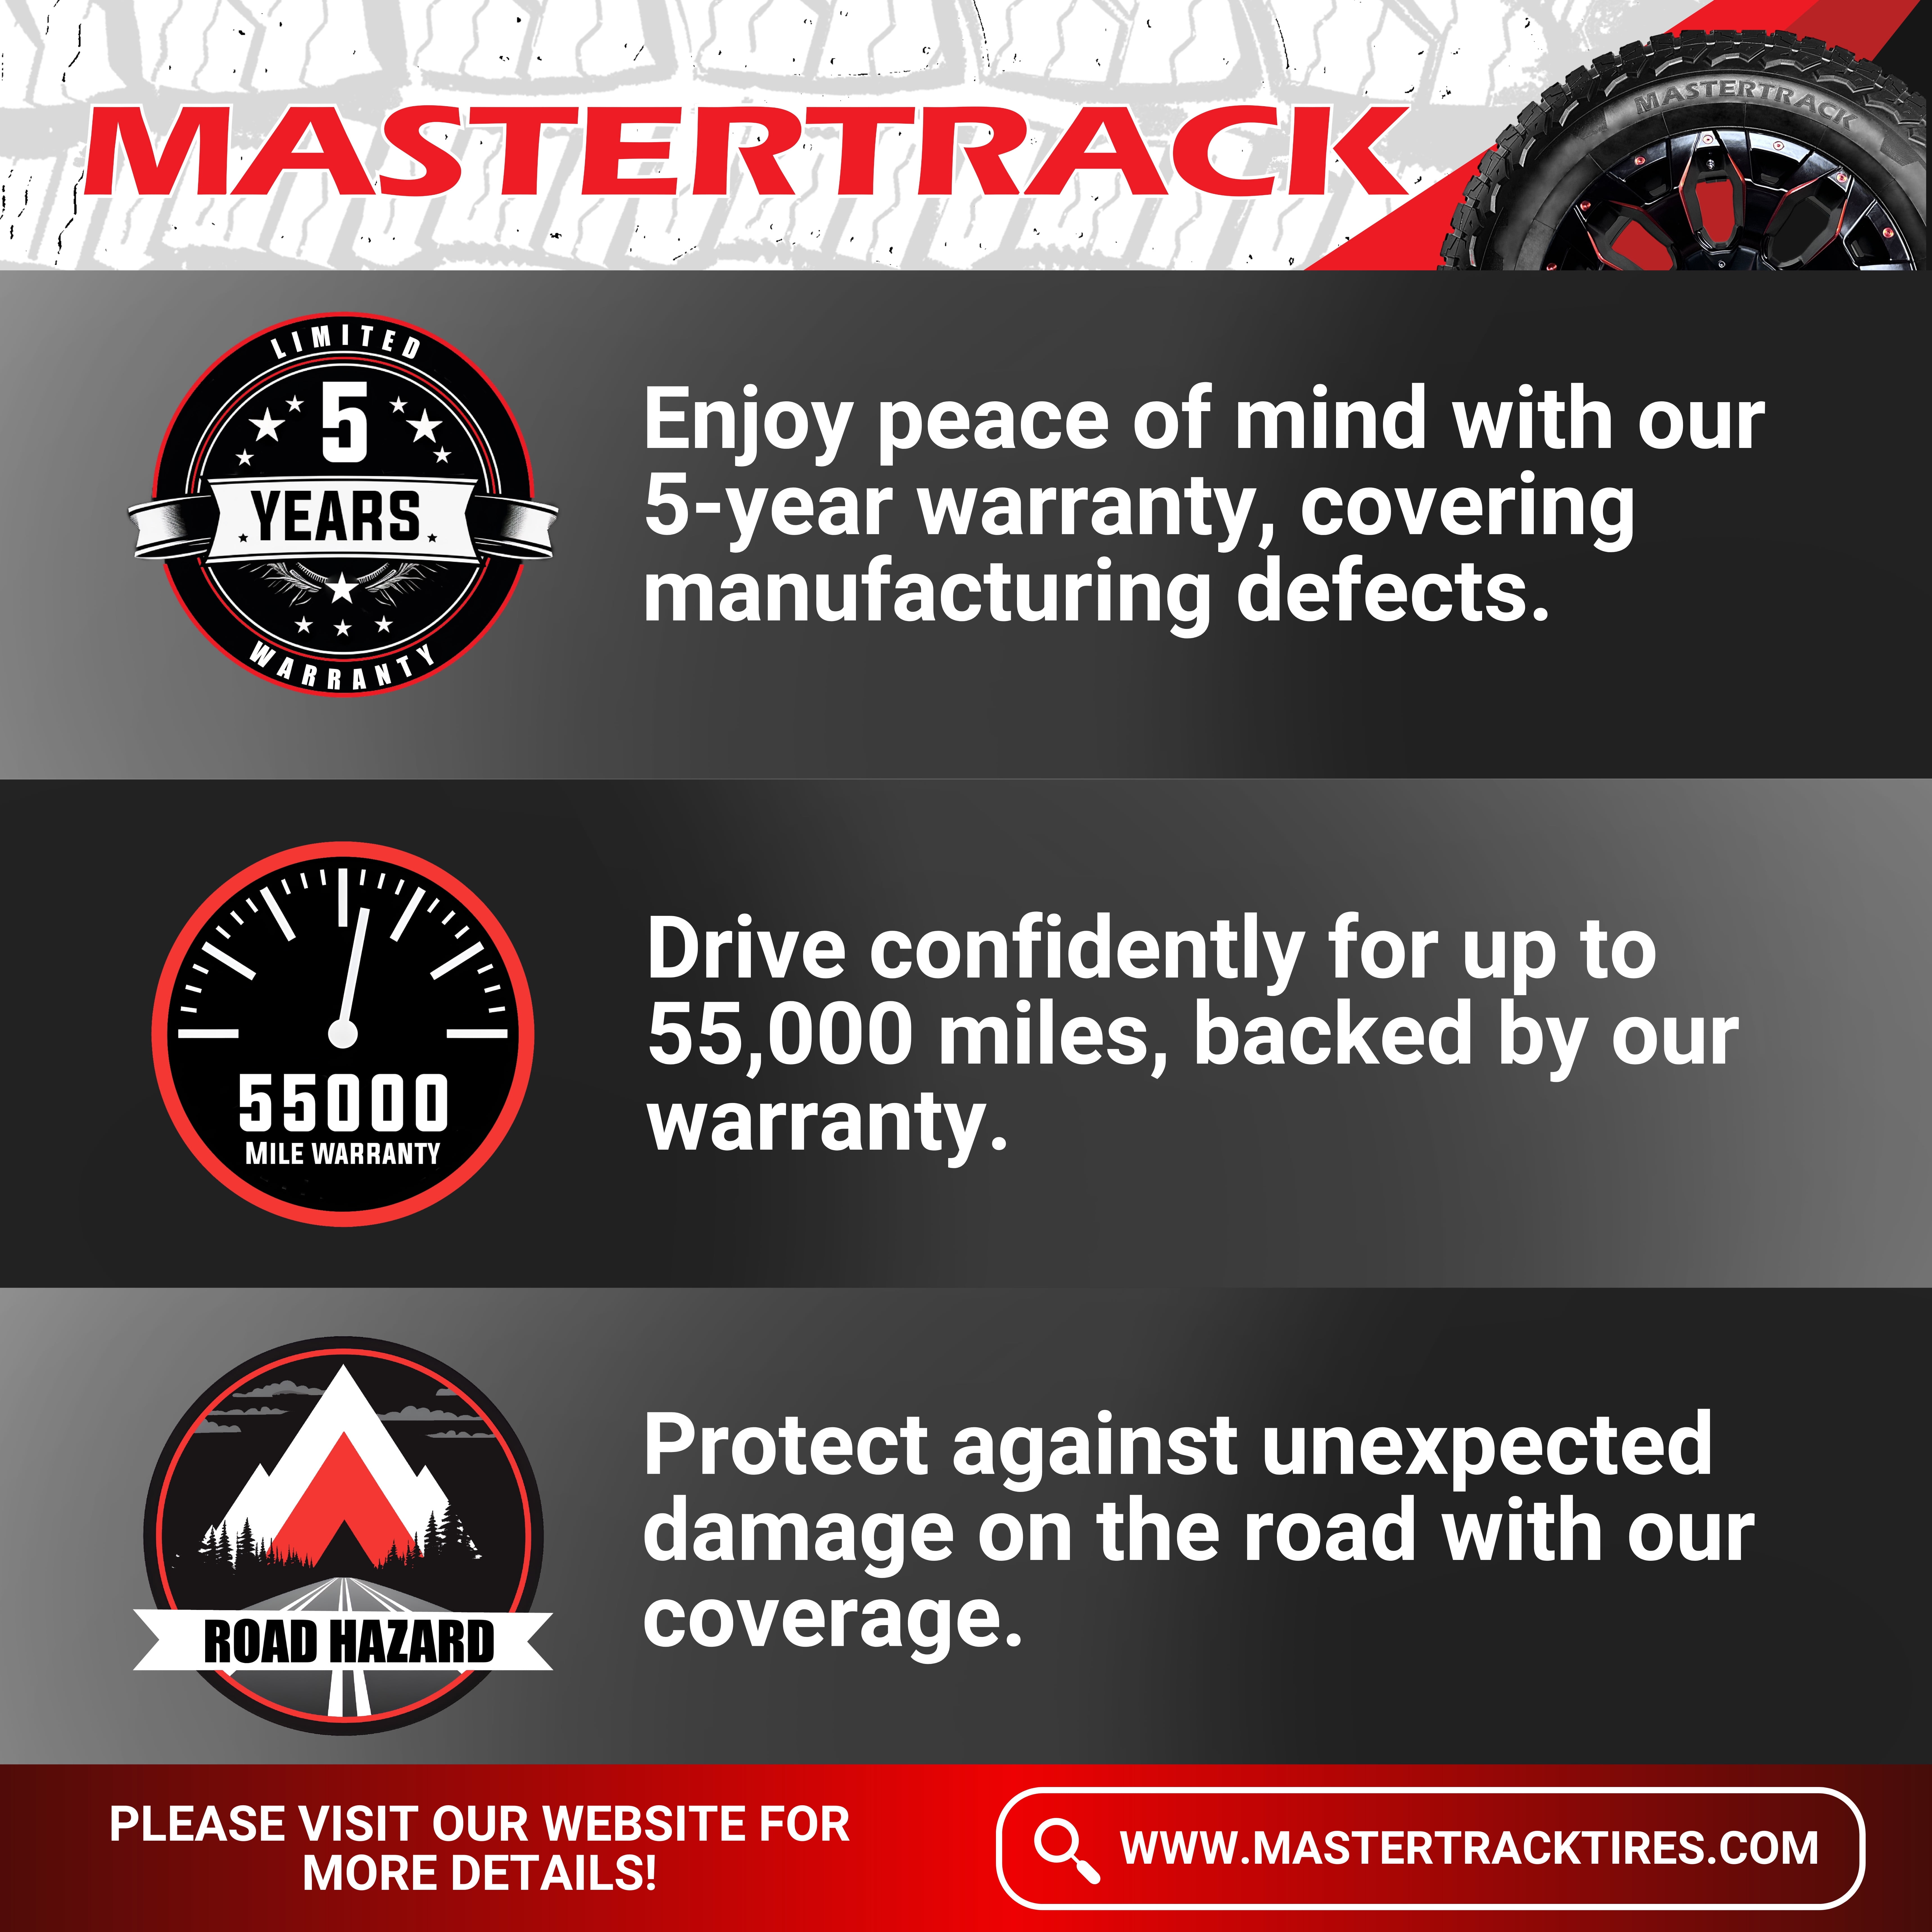 Mastertrack M-TRAC TOUR 185/65R15 88H All Season High Performance Passenger Tire 185/65/15 (Tire Only)